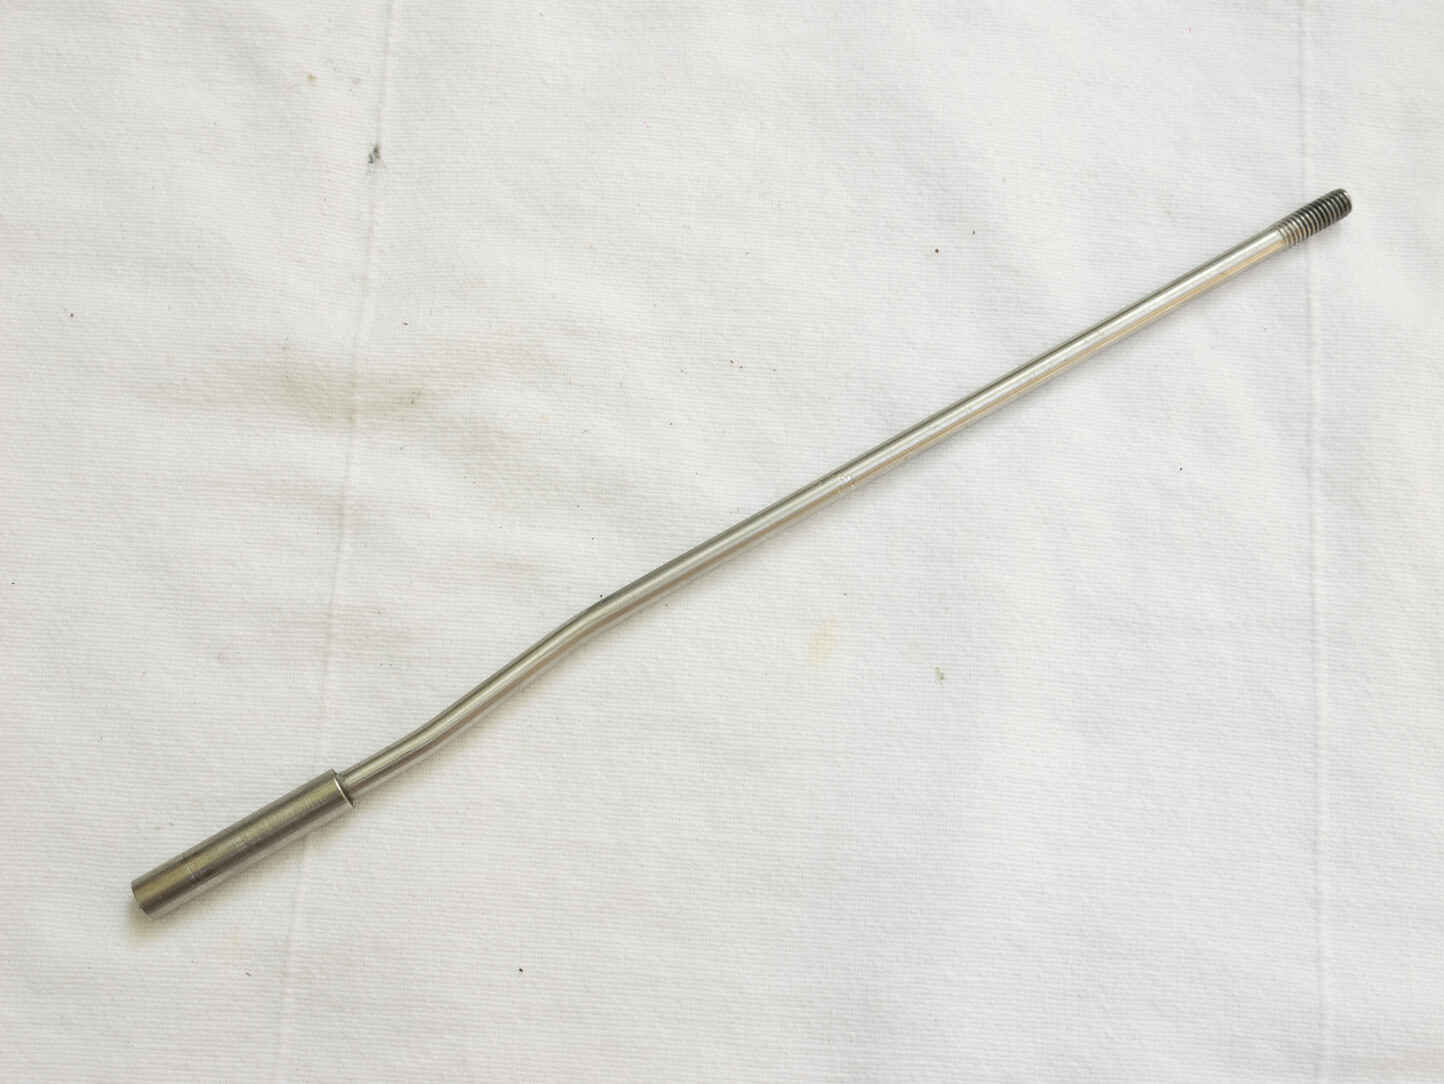 8 inch stainless autococker pump arm, used good shape